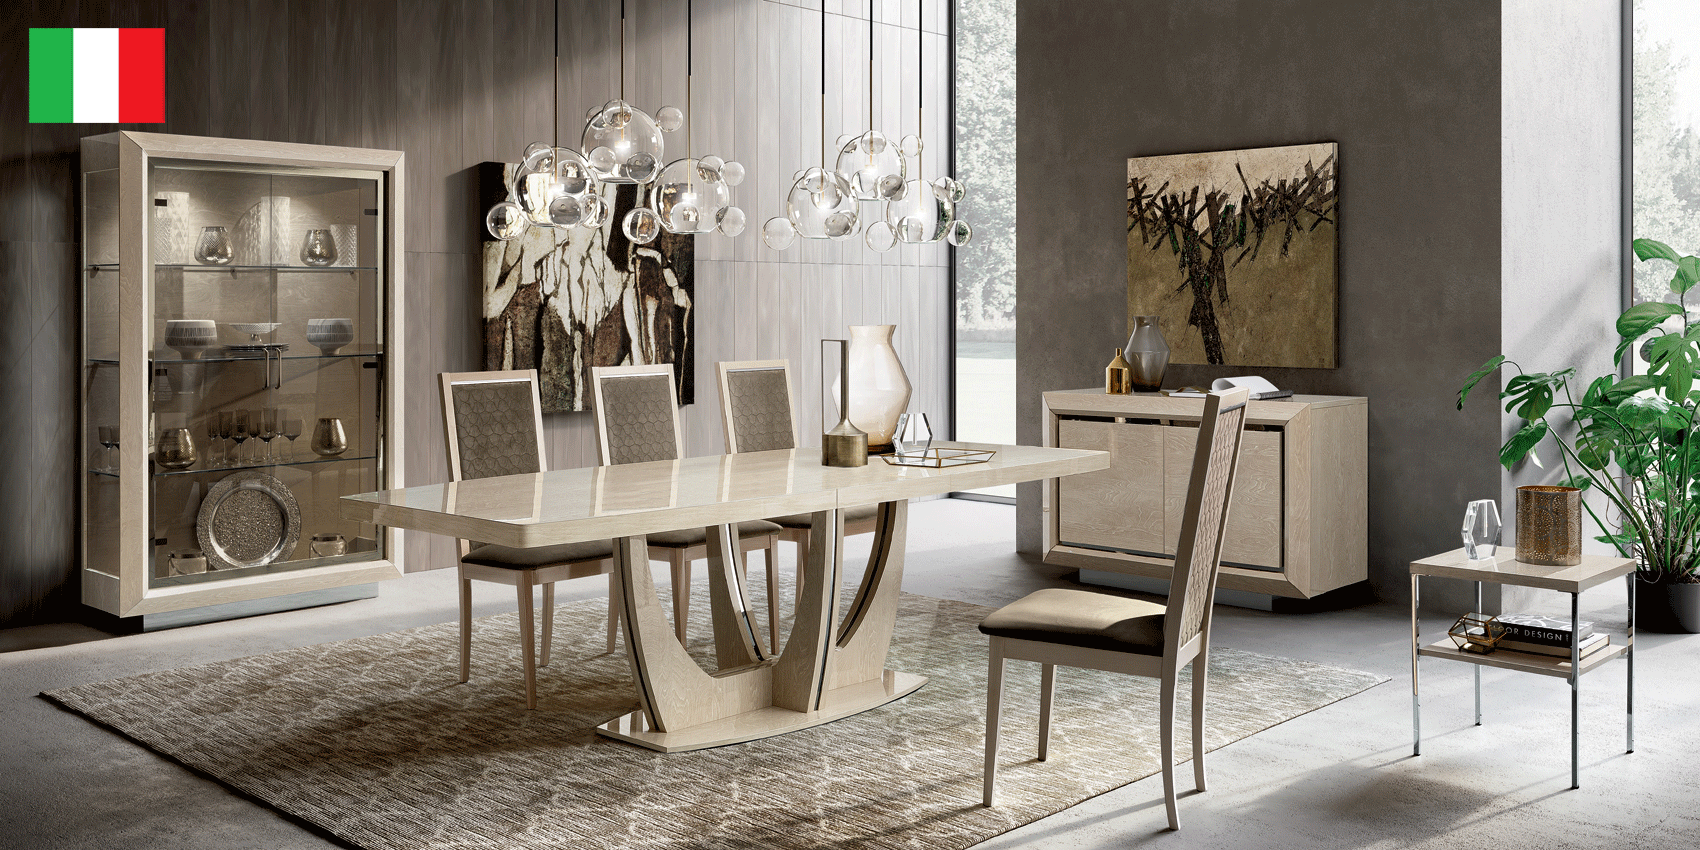 Clearance Dining Room Elite Dining Ivory with Ambra “Rombi” Chairs